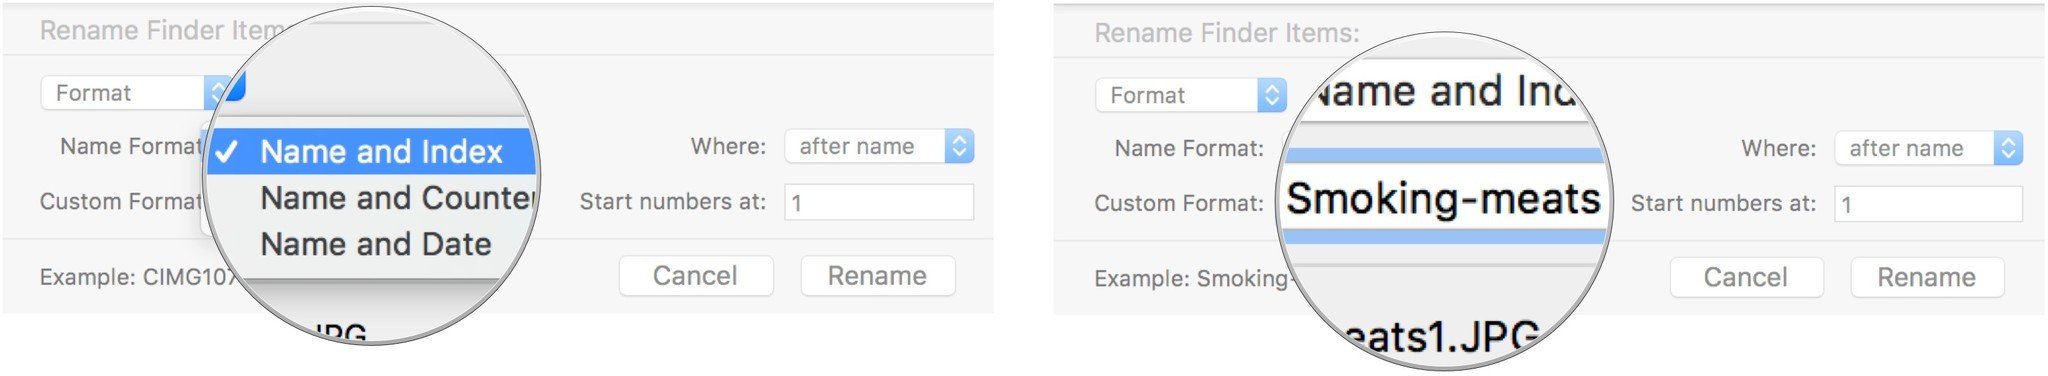 Click on Name Format, then enter a new name